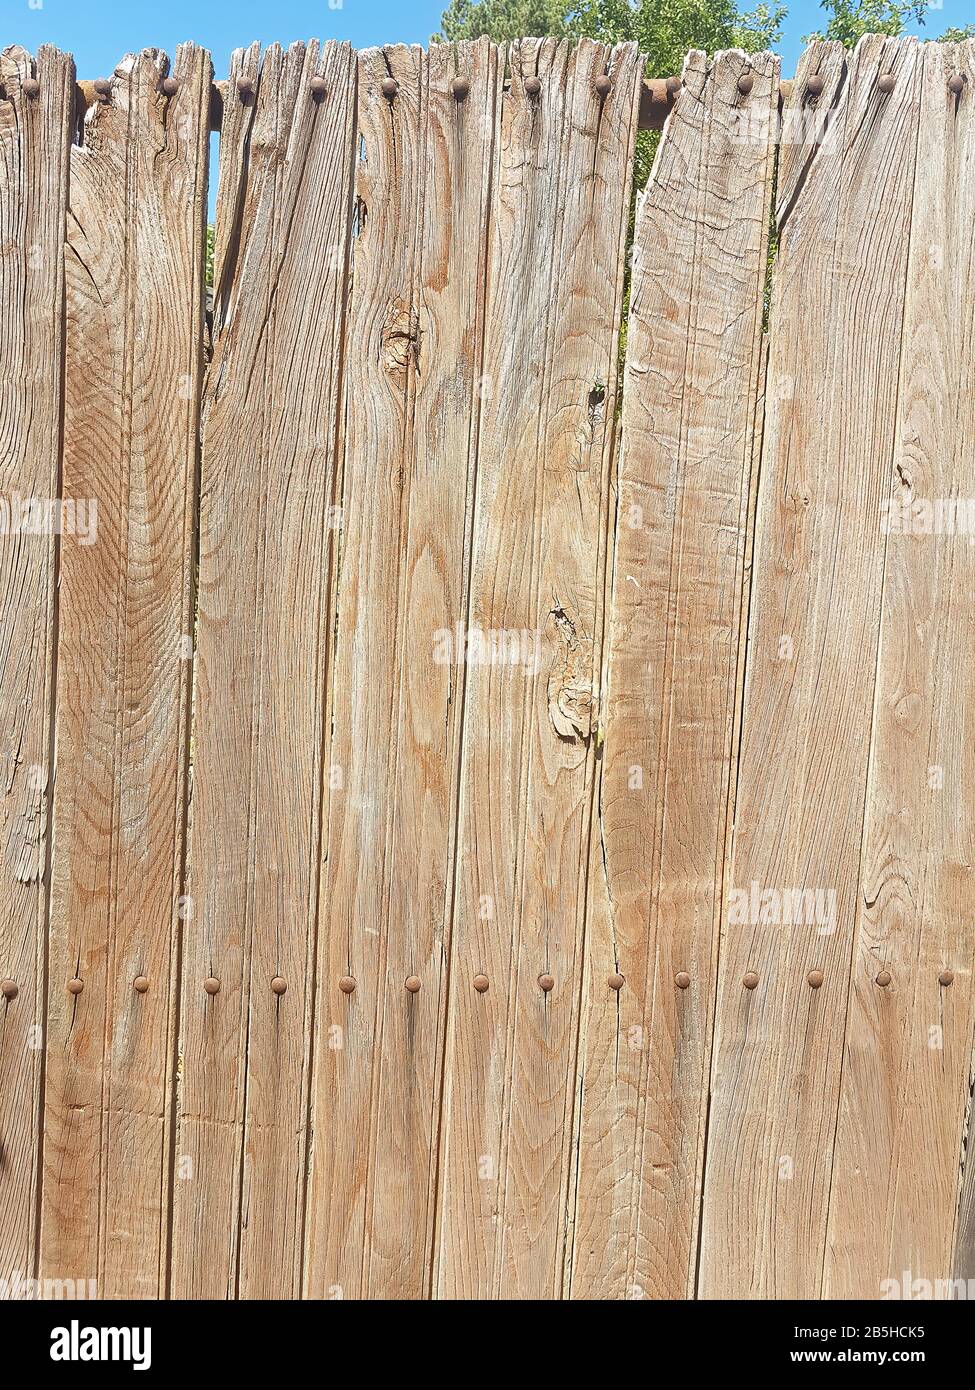 a background with wooden boards Stock Photo